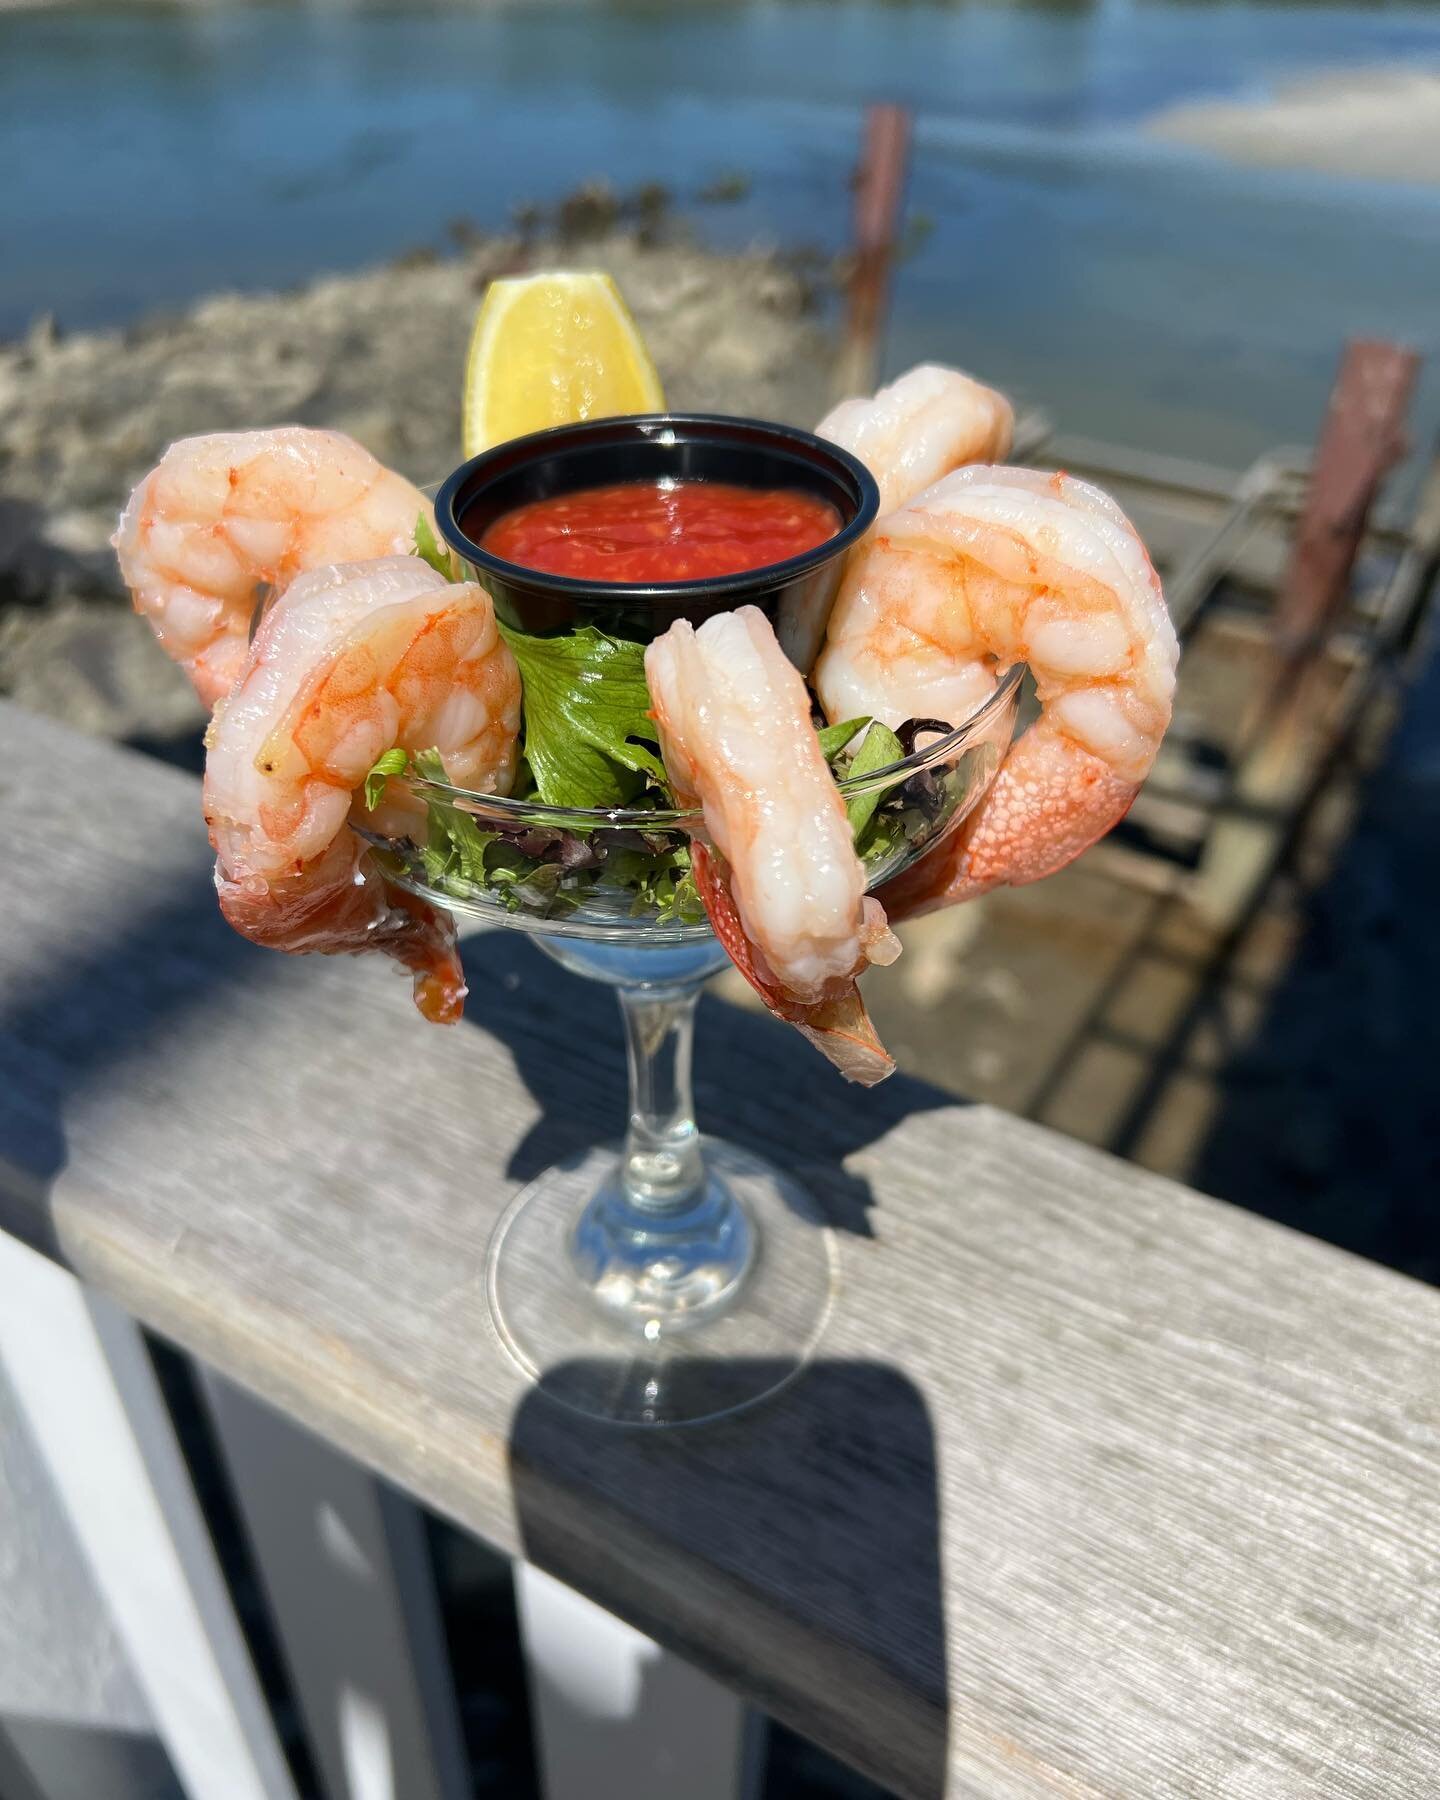 A hot summer day calls for a nice cool shrimp cocktail!